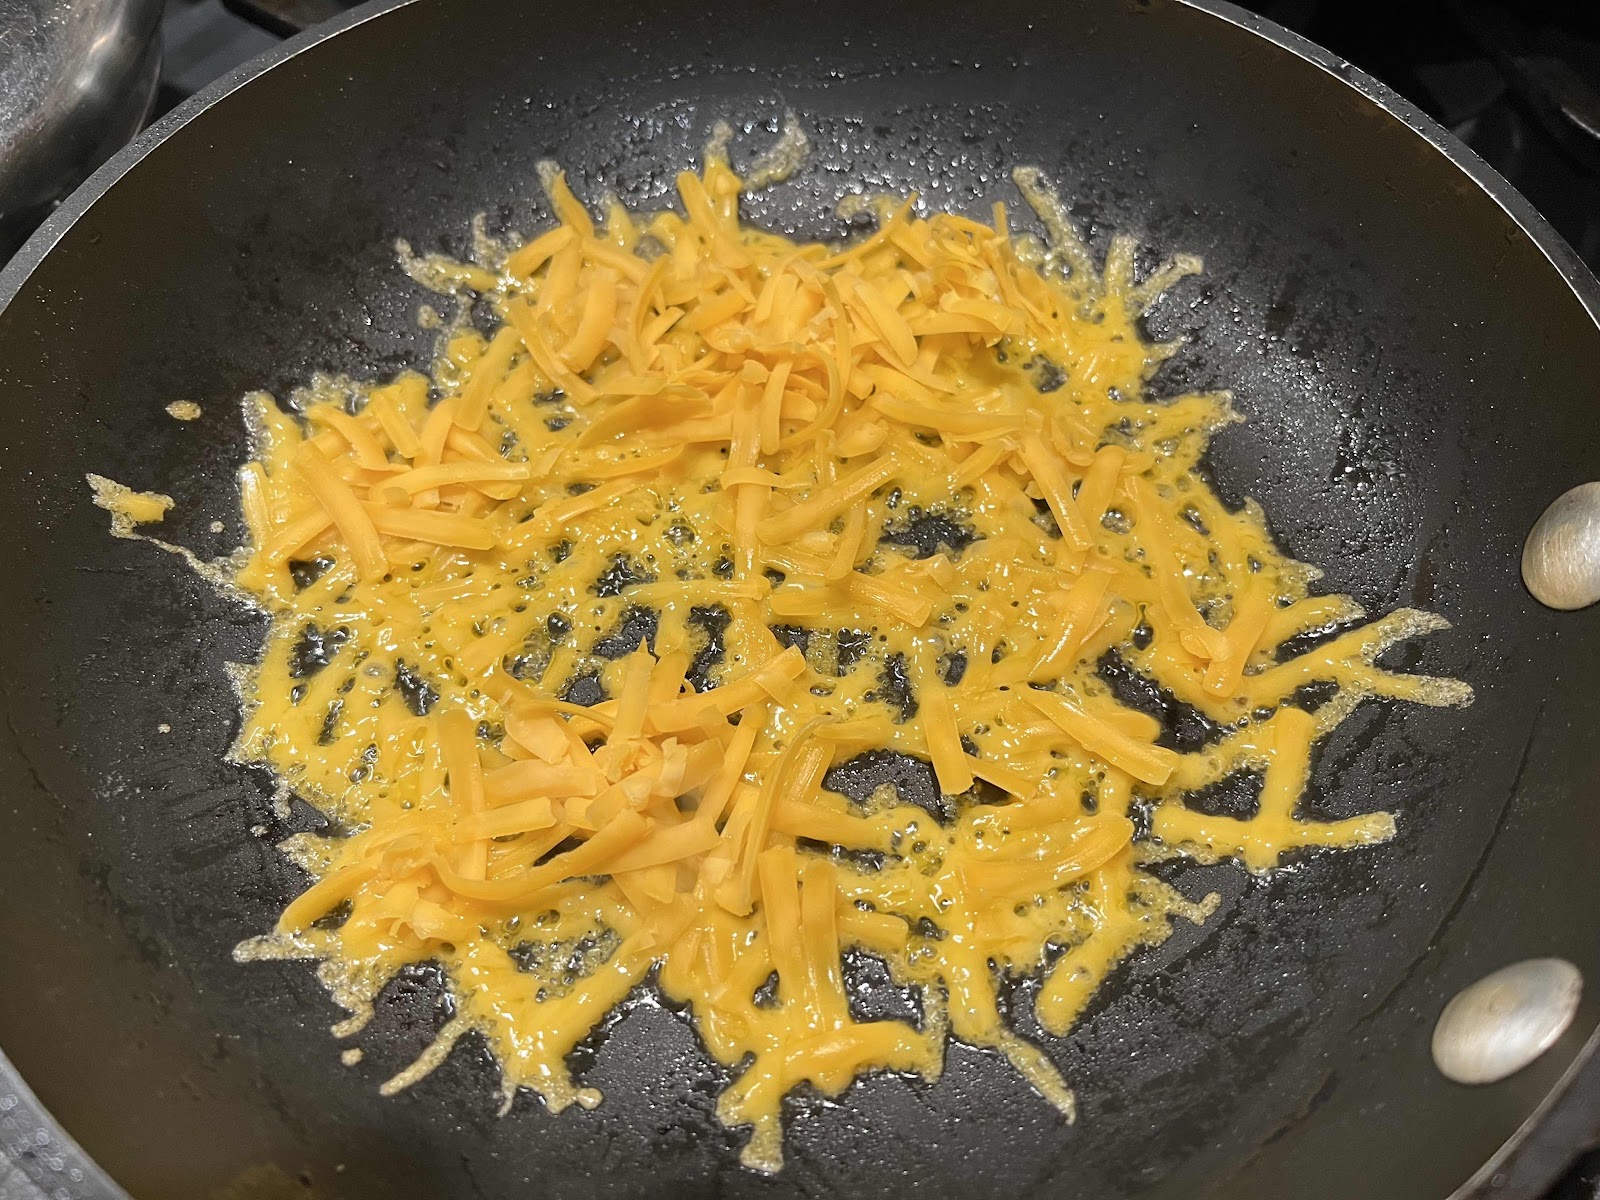 Sprinkle skillet with cheese